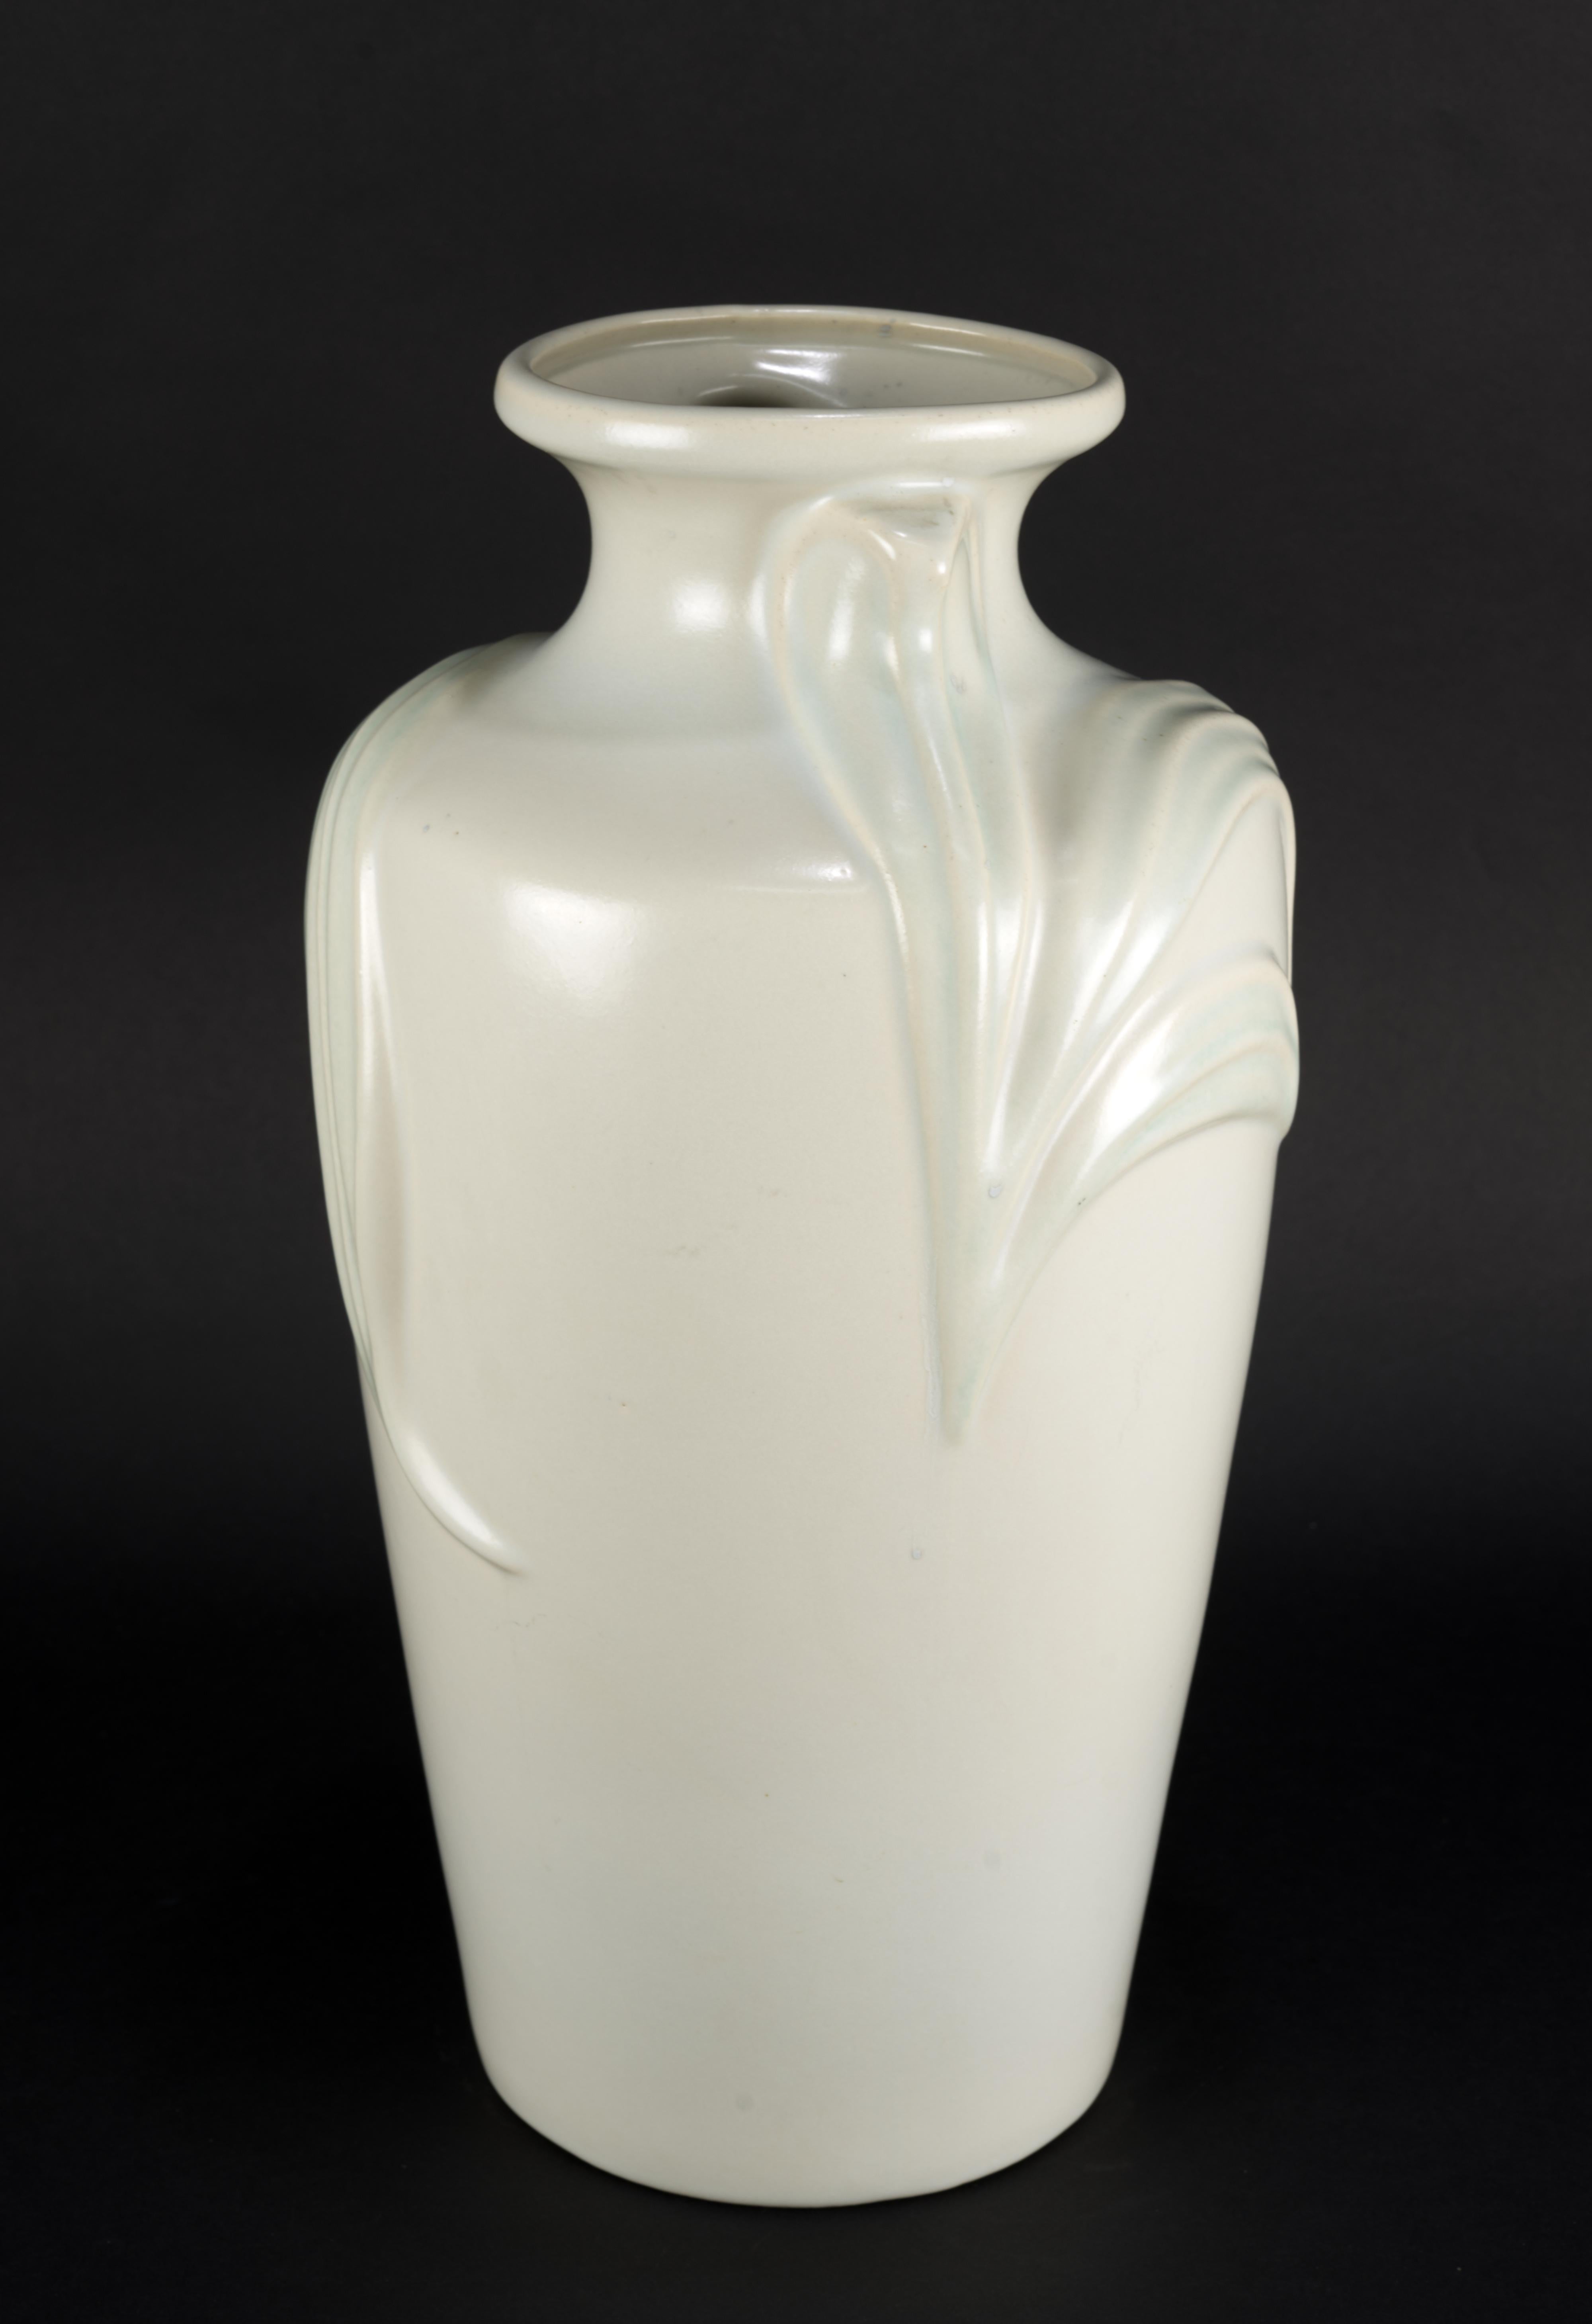  Large vase in semi-matte light blue and off-white glaze in Art Deco Revival style was made in 1980s by Harris Pottery out of Chicago, Illinois. The vase is decorated with relief of large leaves that are wrapping up around the top of the vase. The